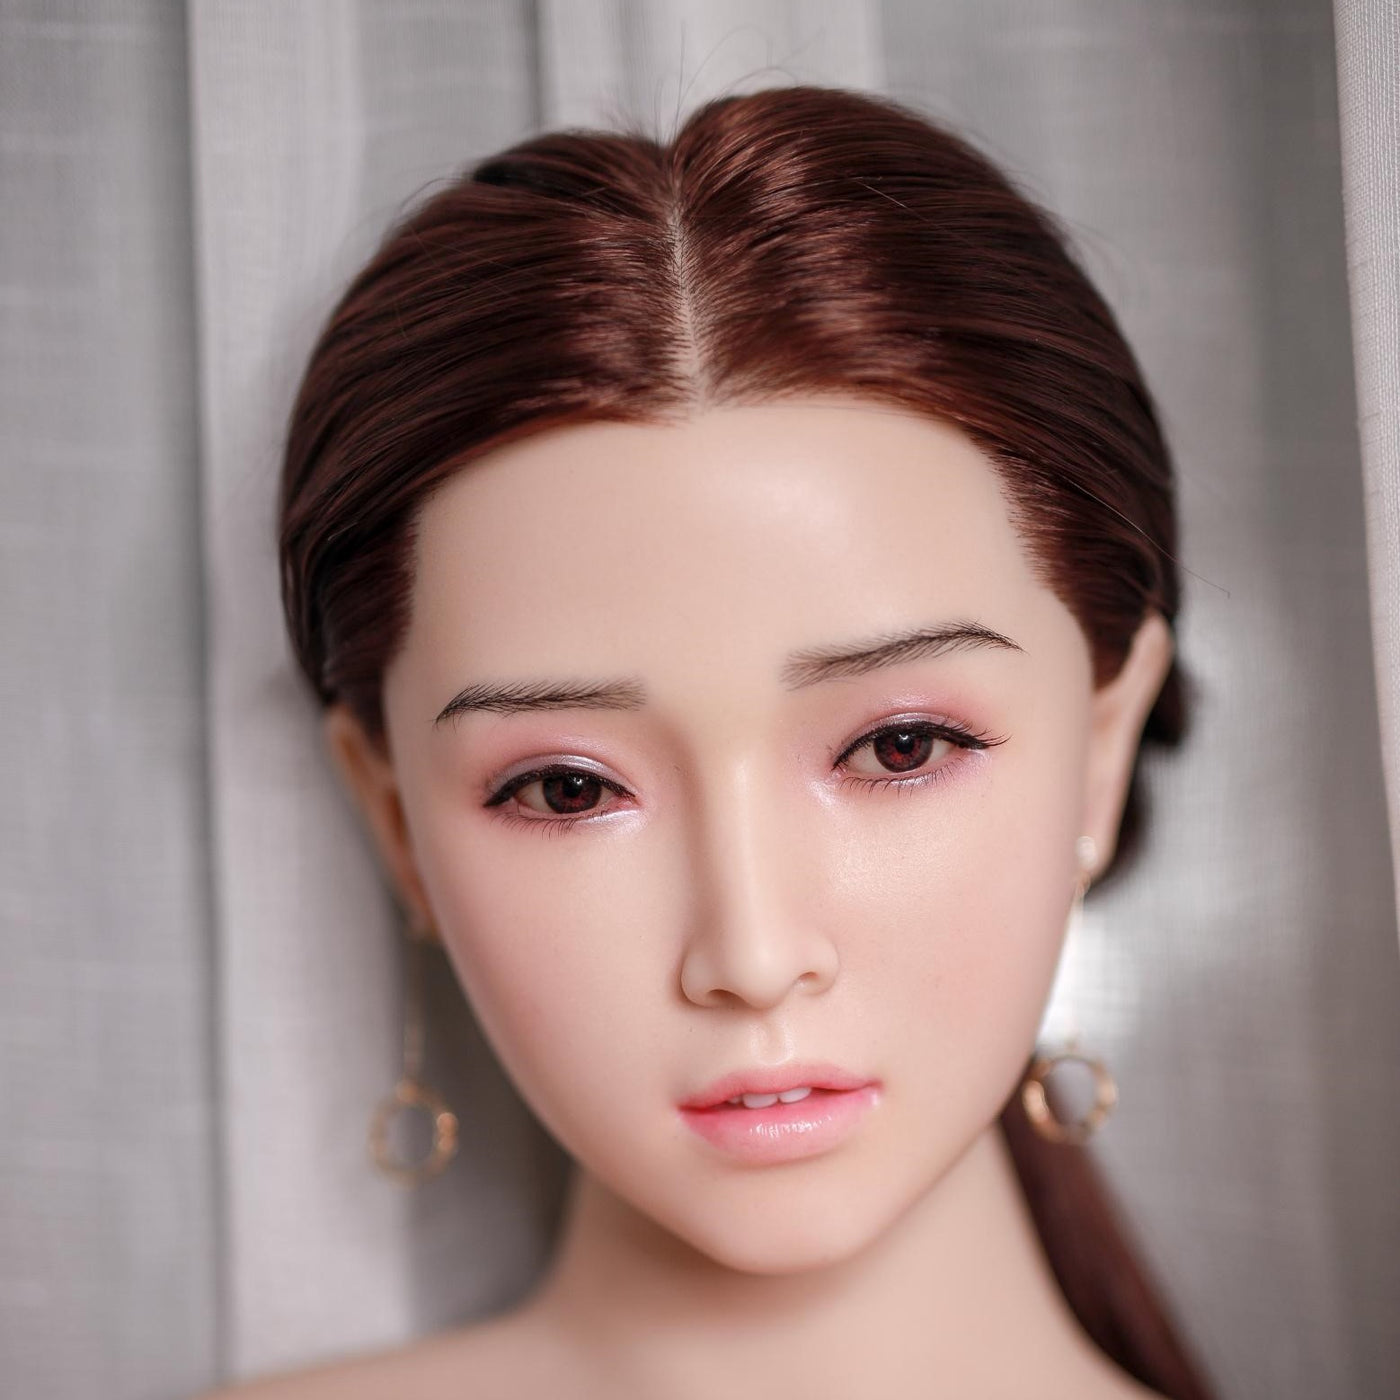 Neodoll Sugar babe - Kehlani - Realistic sex doll head - M16 Compatible - Implanted hair -Silicone color